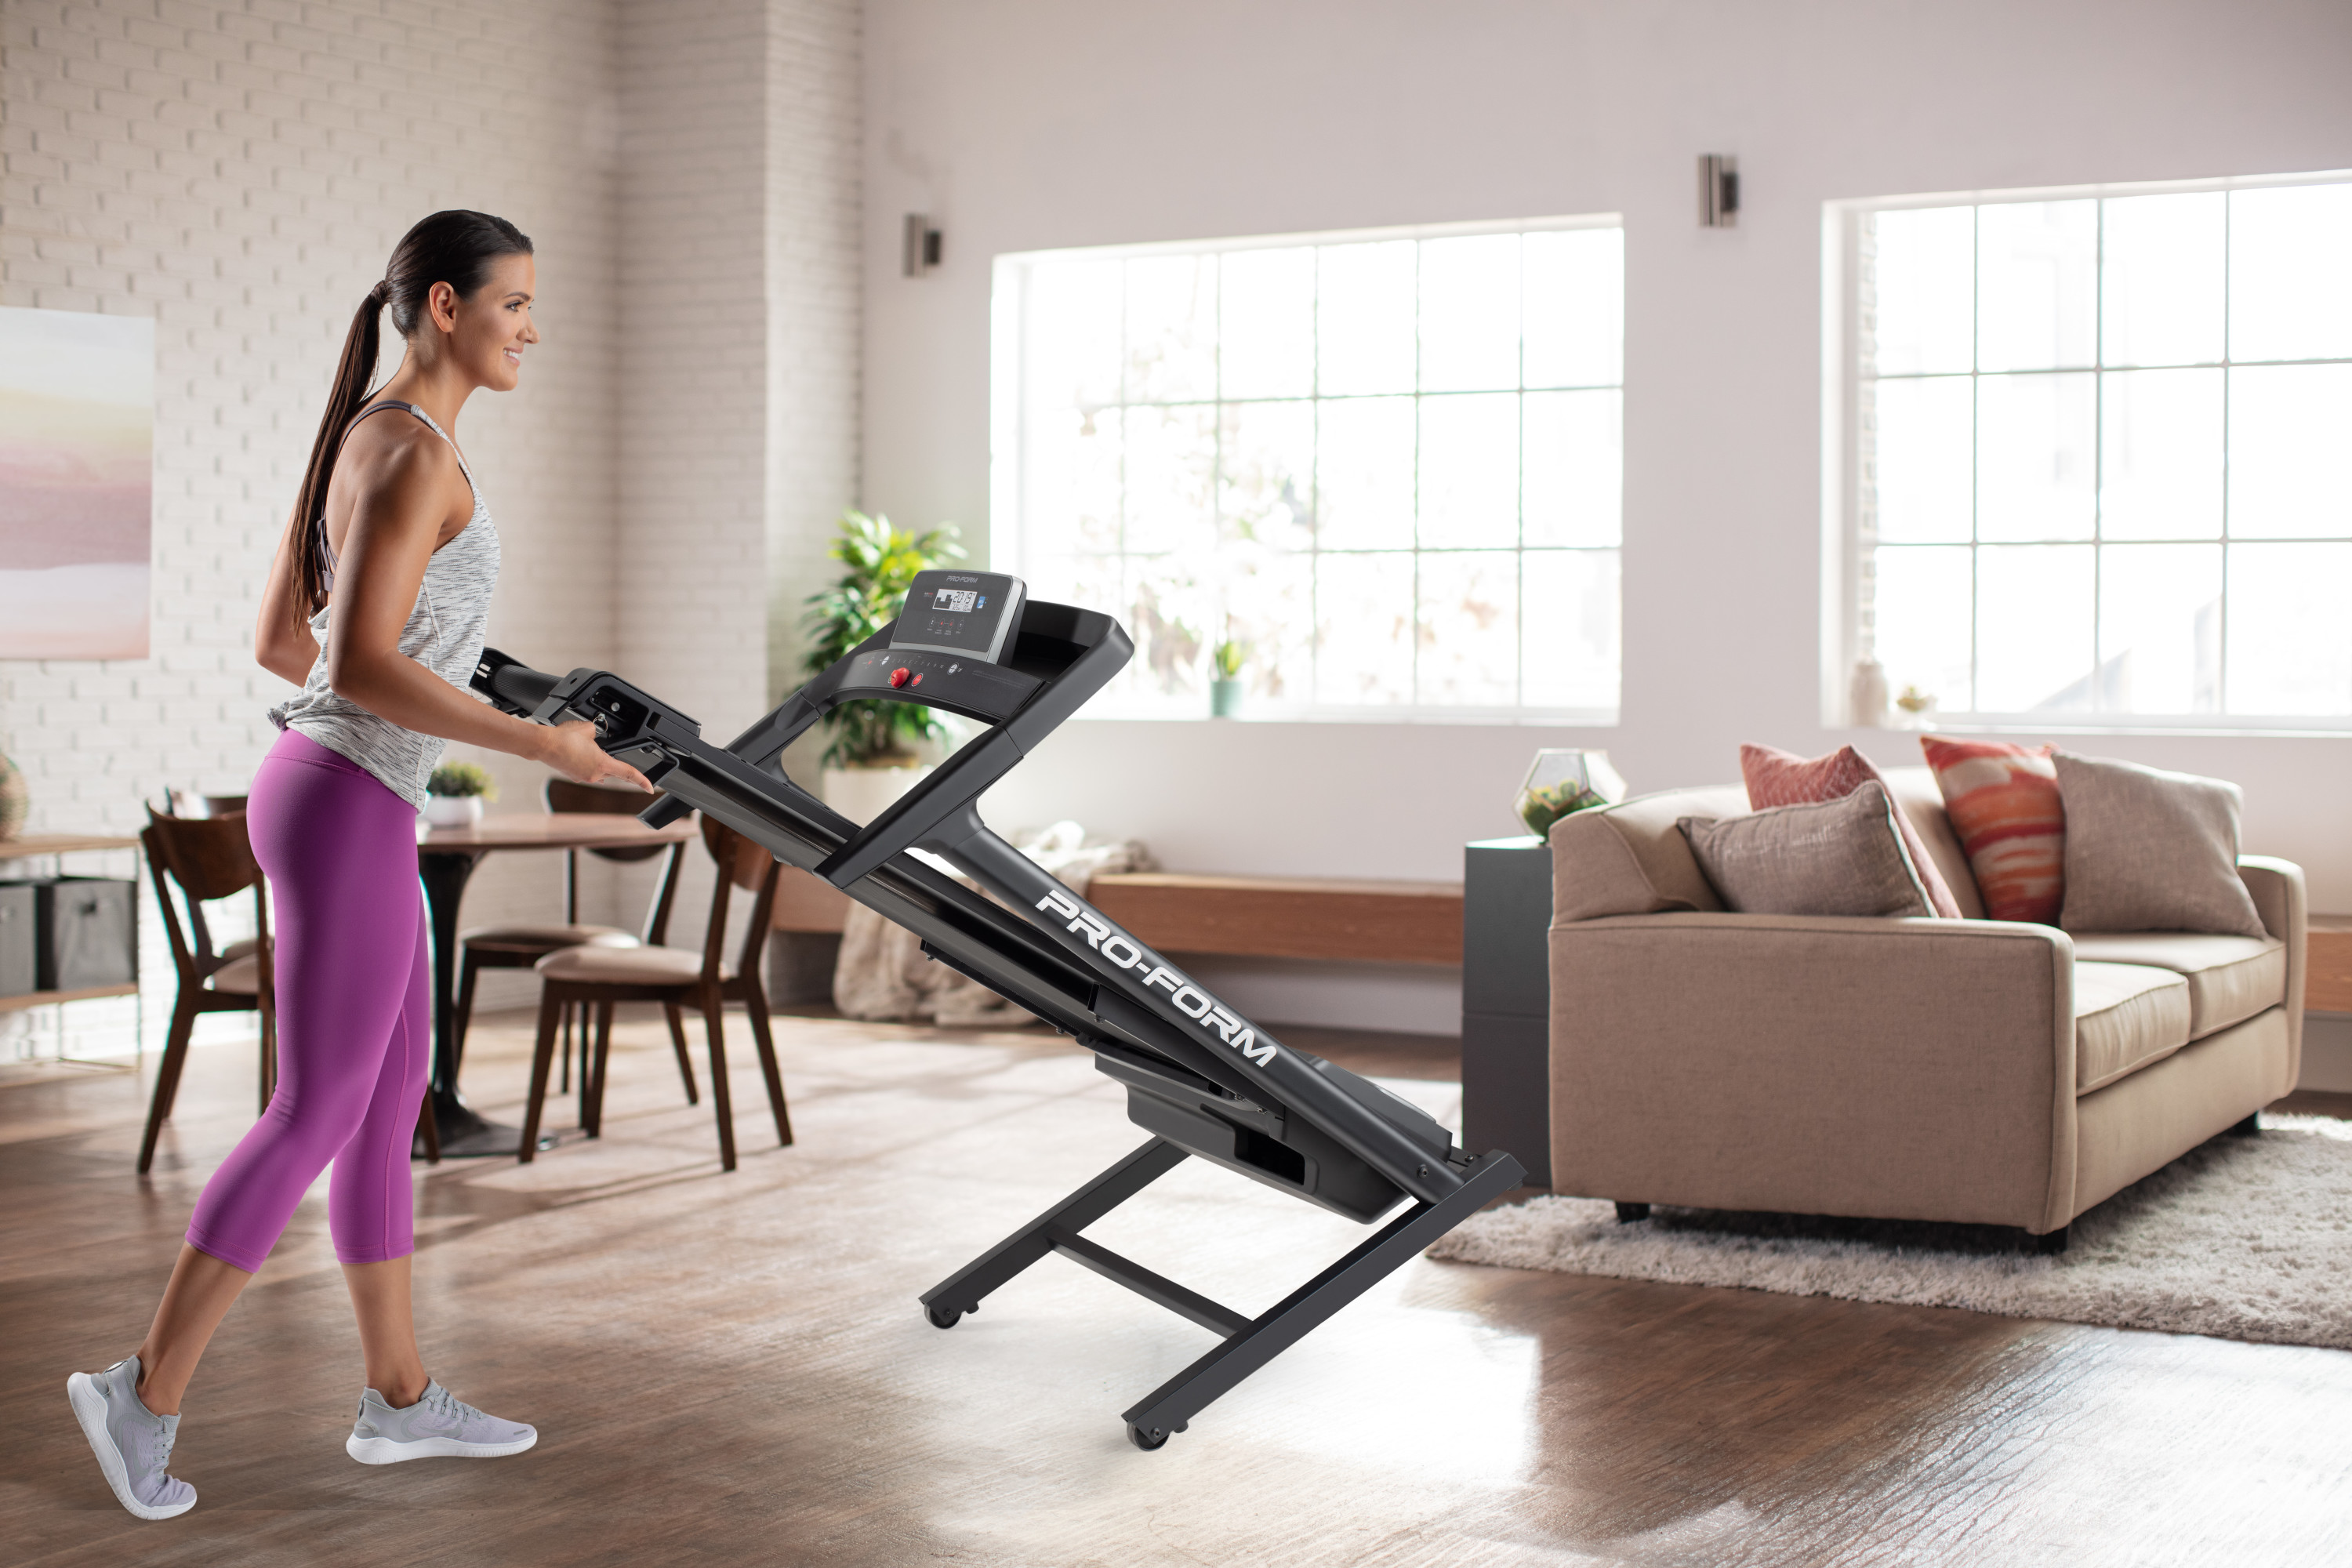 ProForm Cadence WLT Folding Treadmill with Reflex Deck for Walking and Jogging, iFit Bluetooth Enabled - image 29 of 31